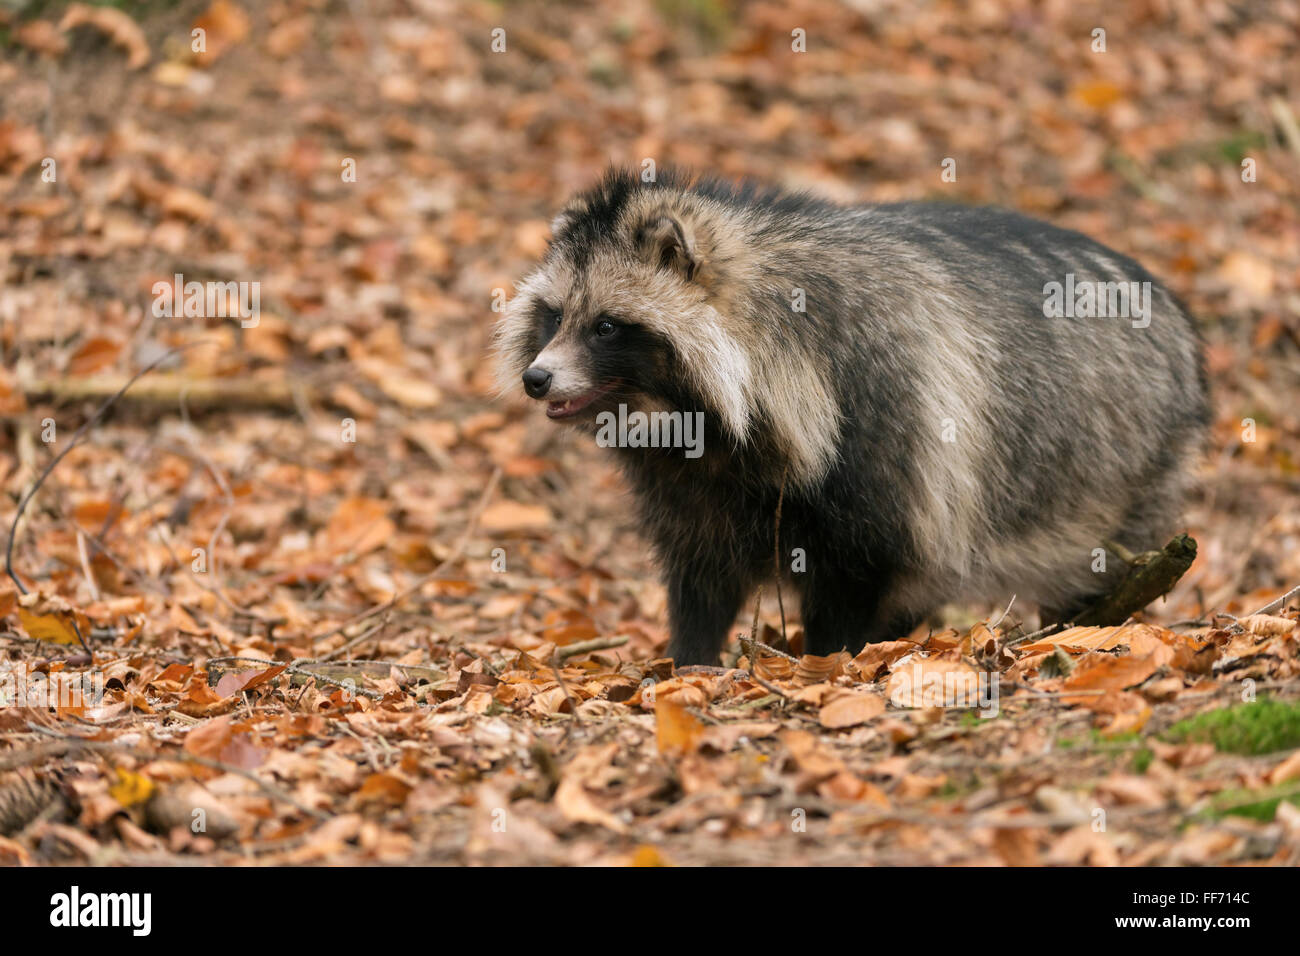 Raccoon dog / Marderhund ( Nyctereutes procyonoides ) surrounded by fallen leaves, autumnal colors, invasive species. Stock Photo